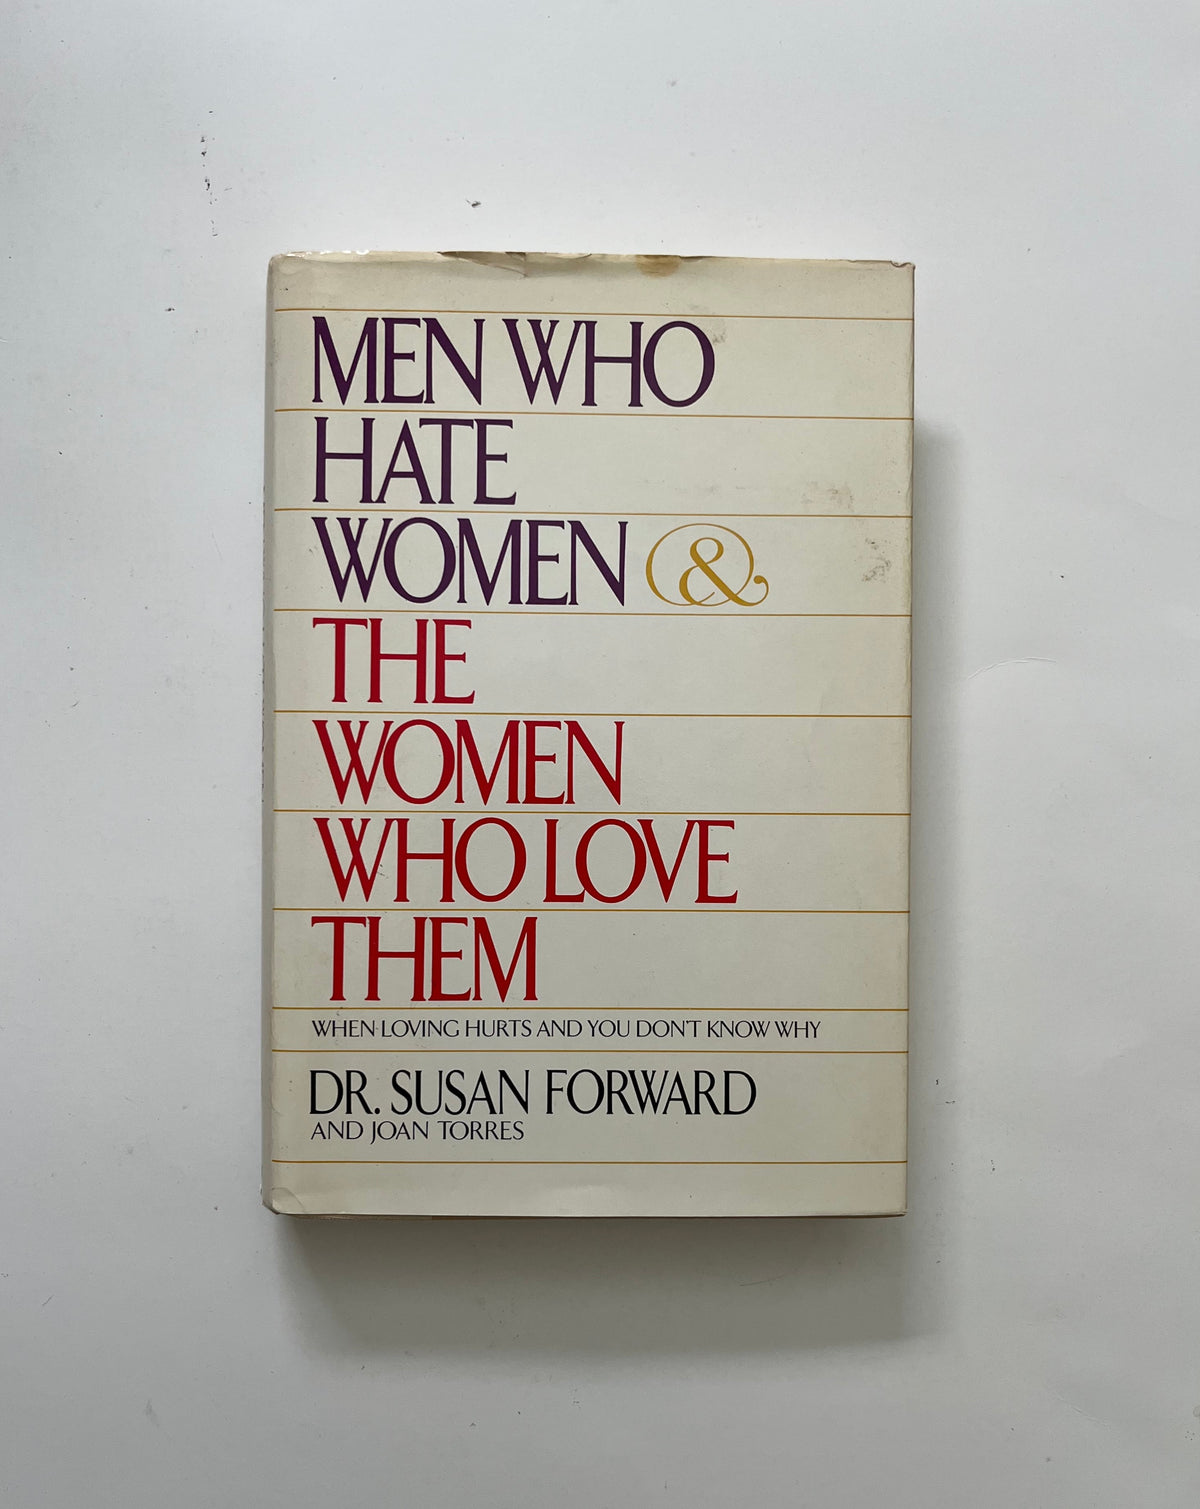 Men Who Hate Women and the Women Who Love Them by Susan Forward